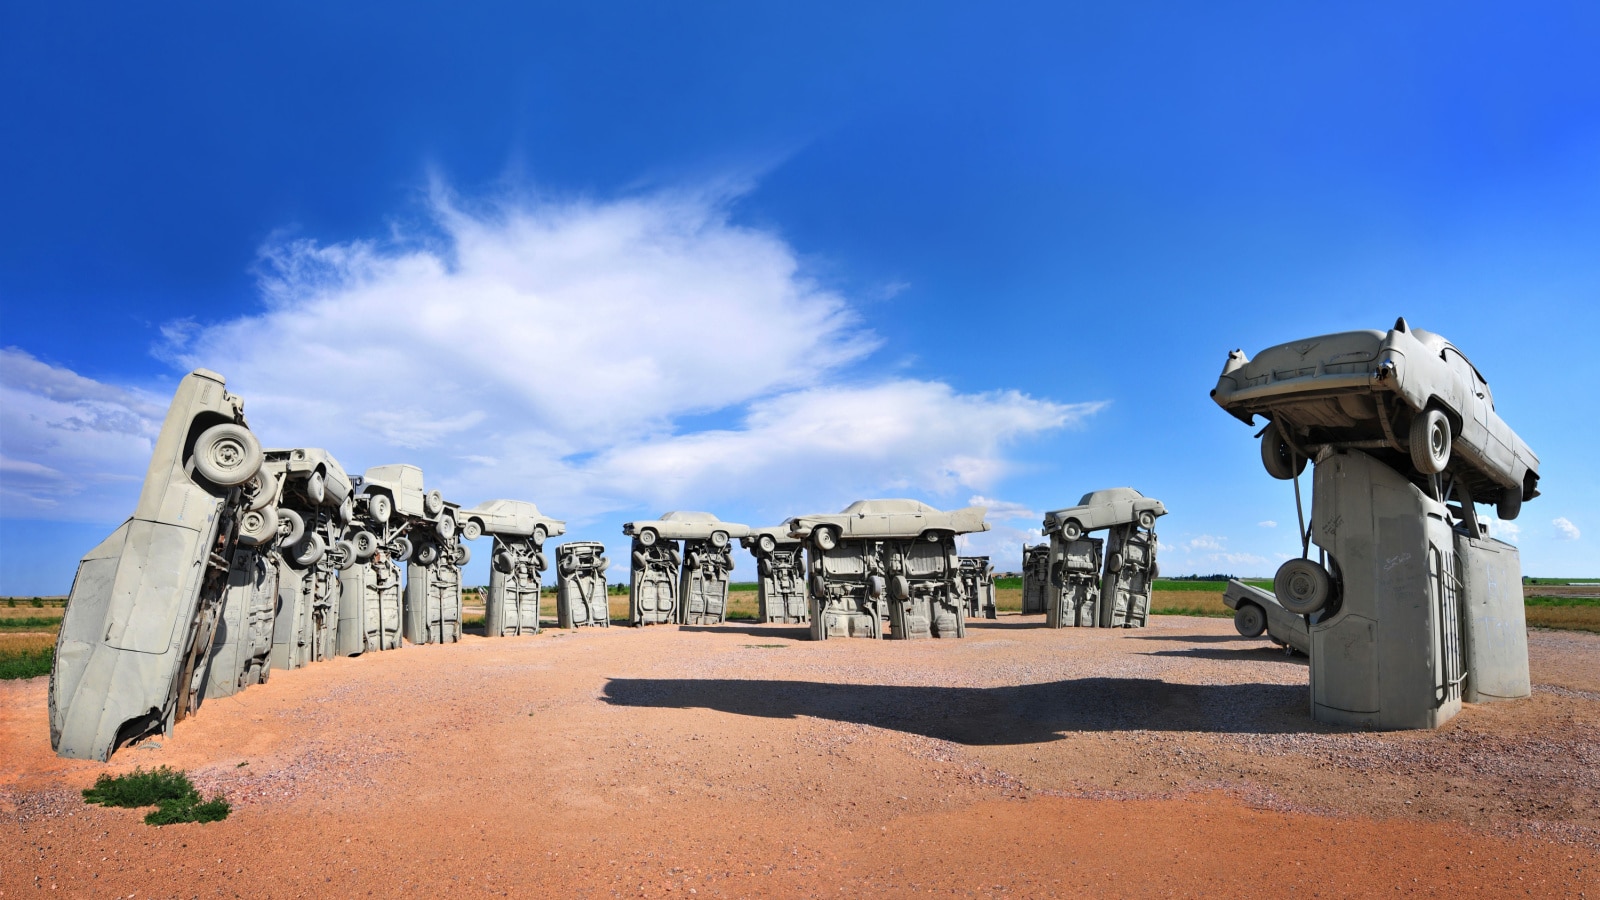 ALLIANCE, NE - AUGUST 2014: Carhenge, famous car sculpture recreating the Stonehenge in England created and installed by Jim Reinders dedicated to his father in Alliance, Nebraska, USA. August 16,2014